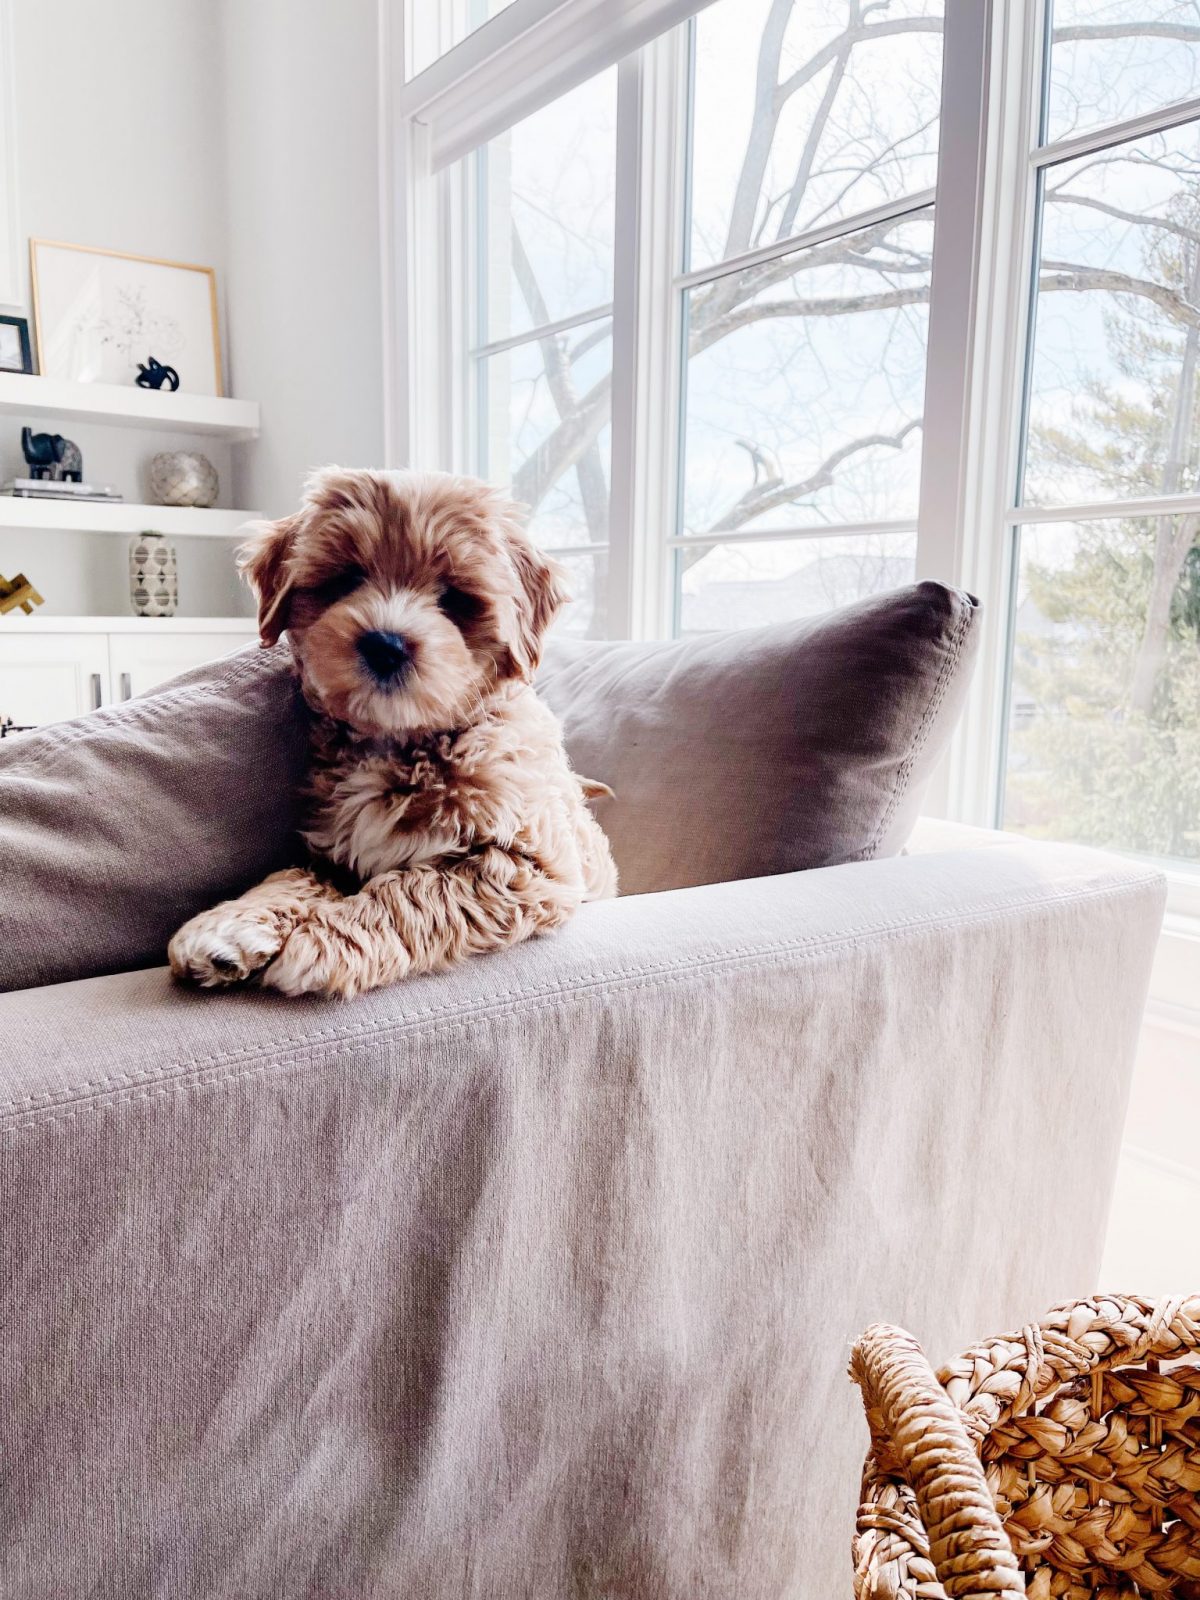 An Australian Labradoodle sitting on a chair in between pillows